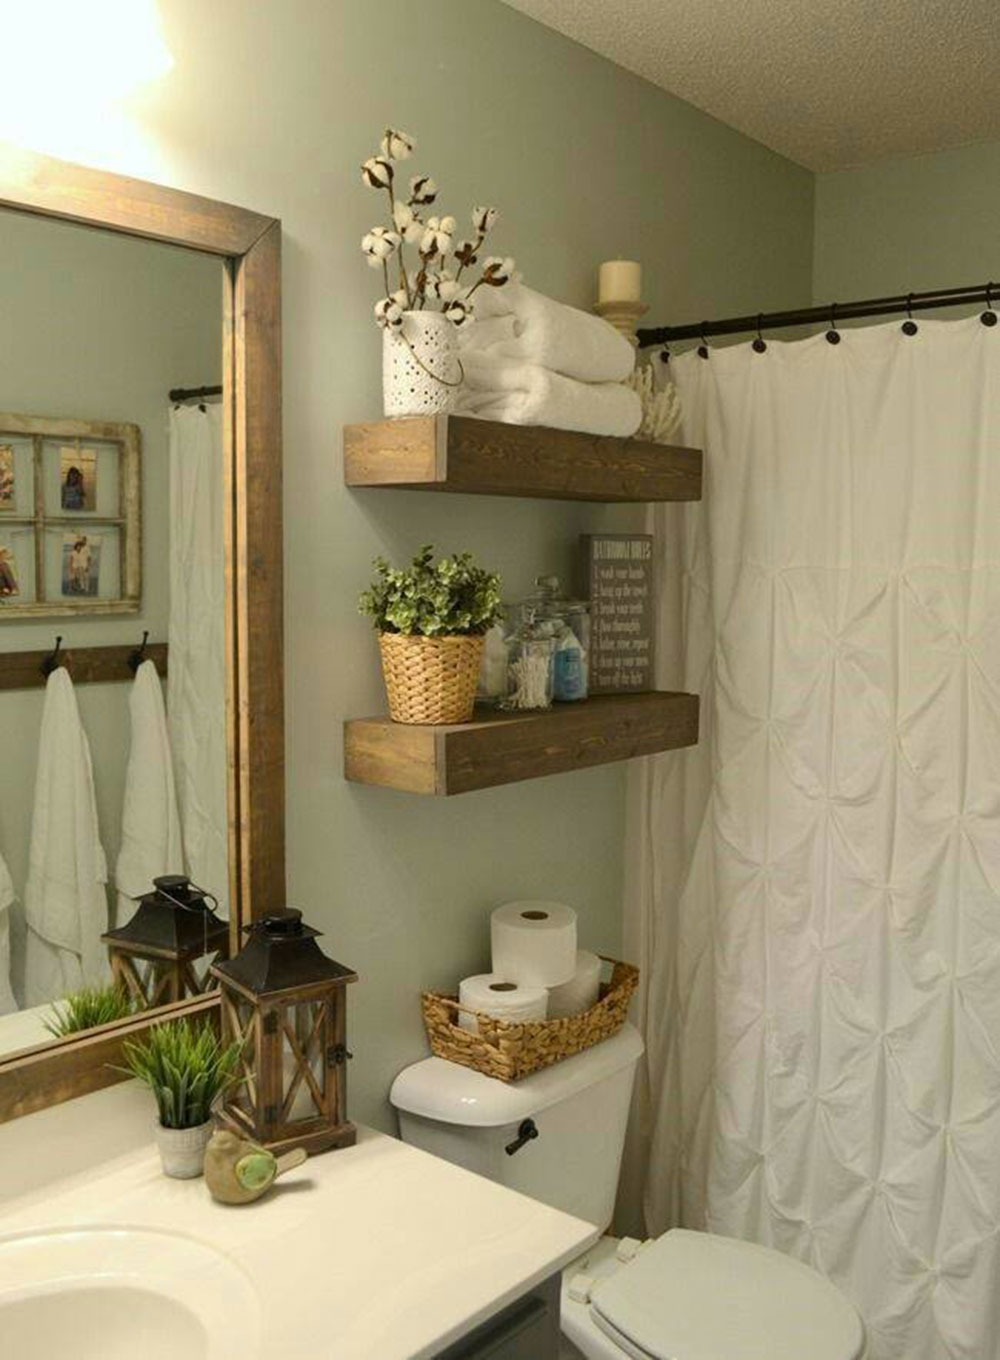 Our-Work-by-Flippin-Rustic Small bathroom shelf ideas to optimize your bathroom space